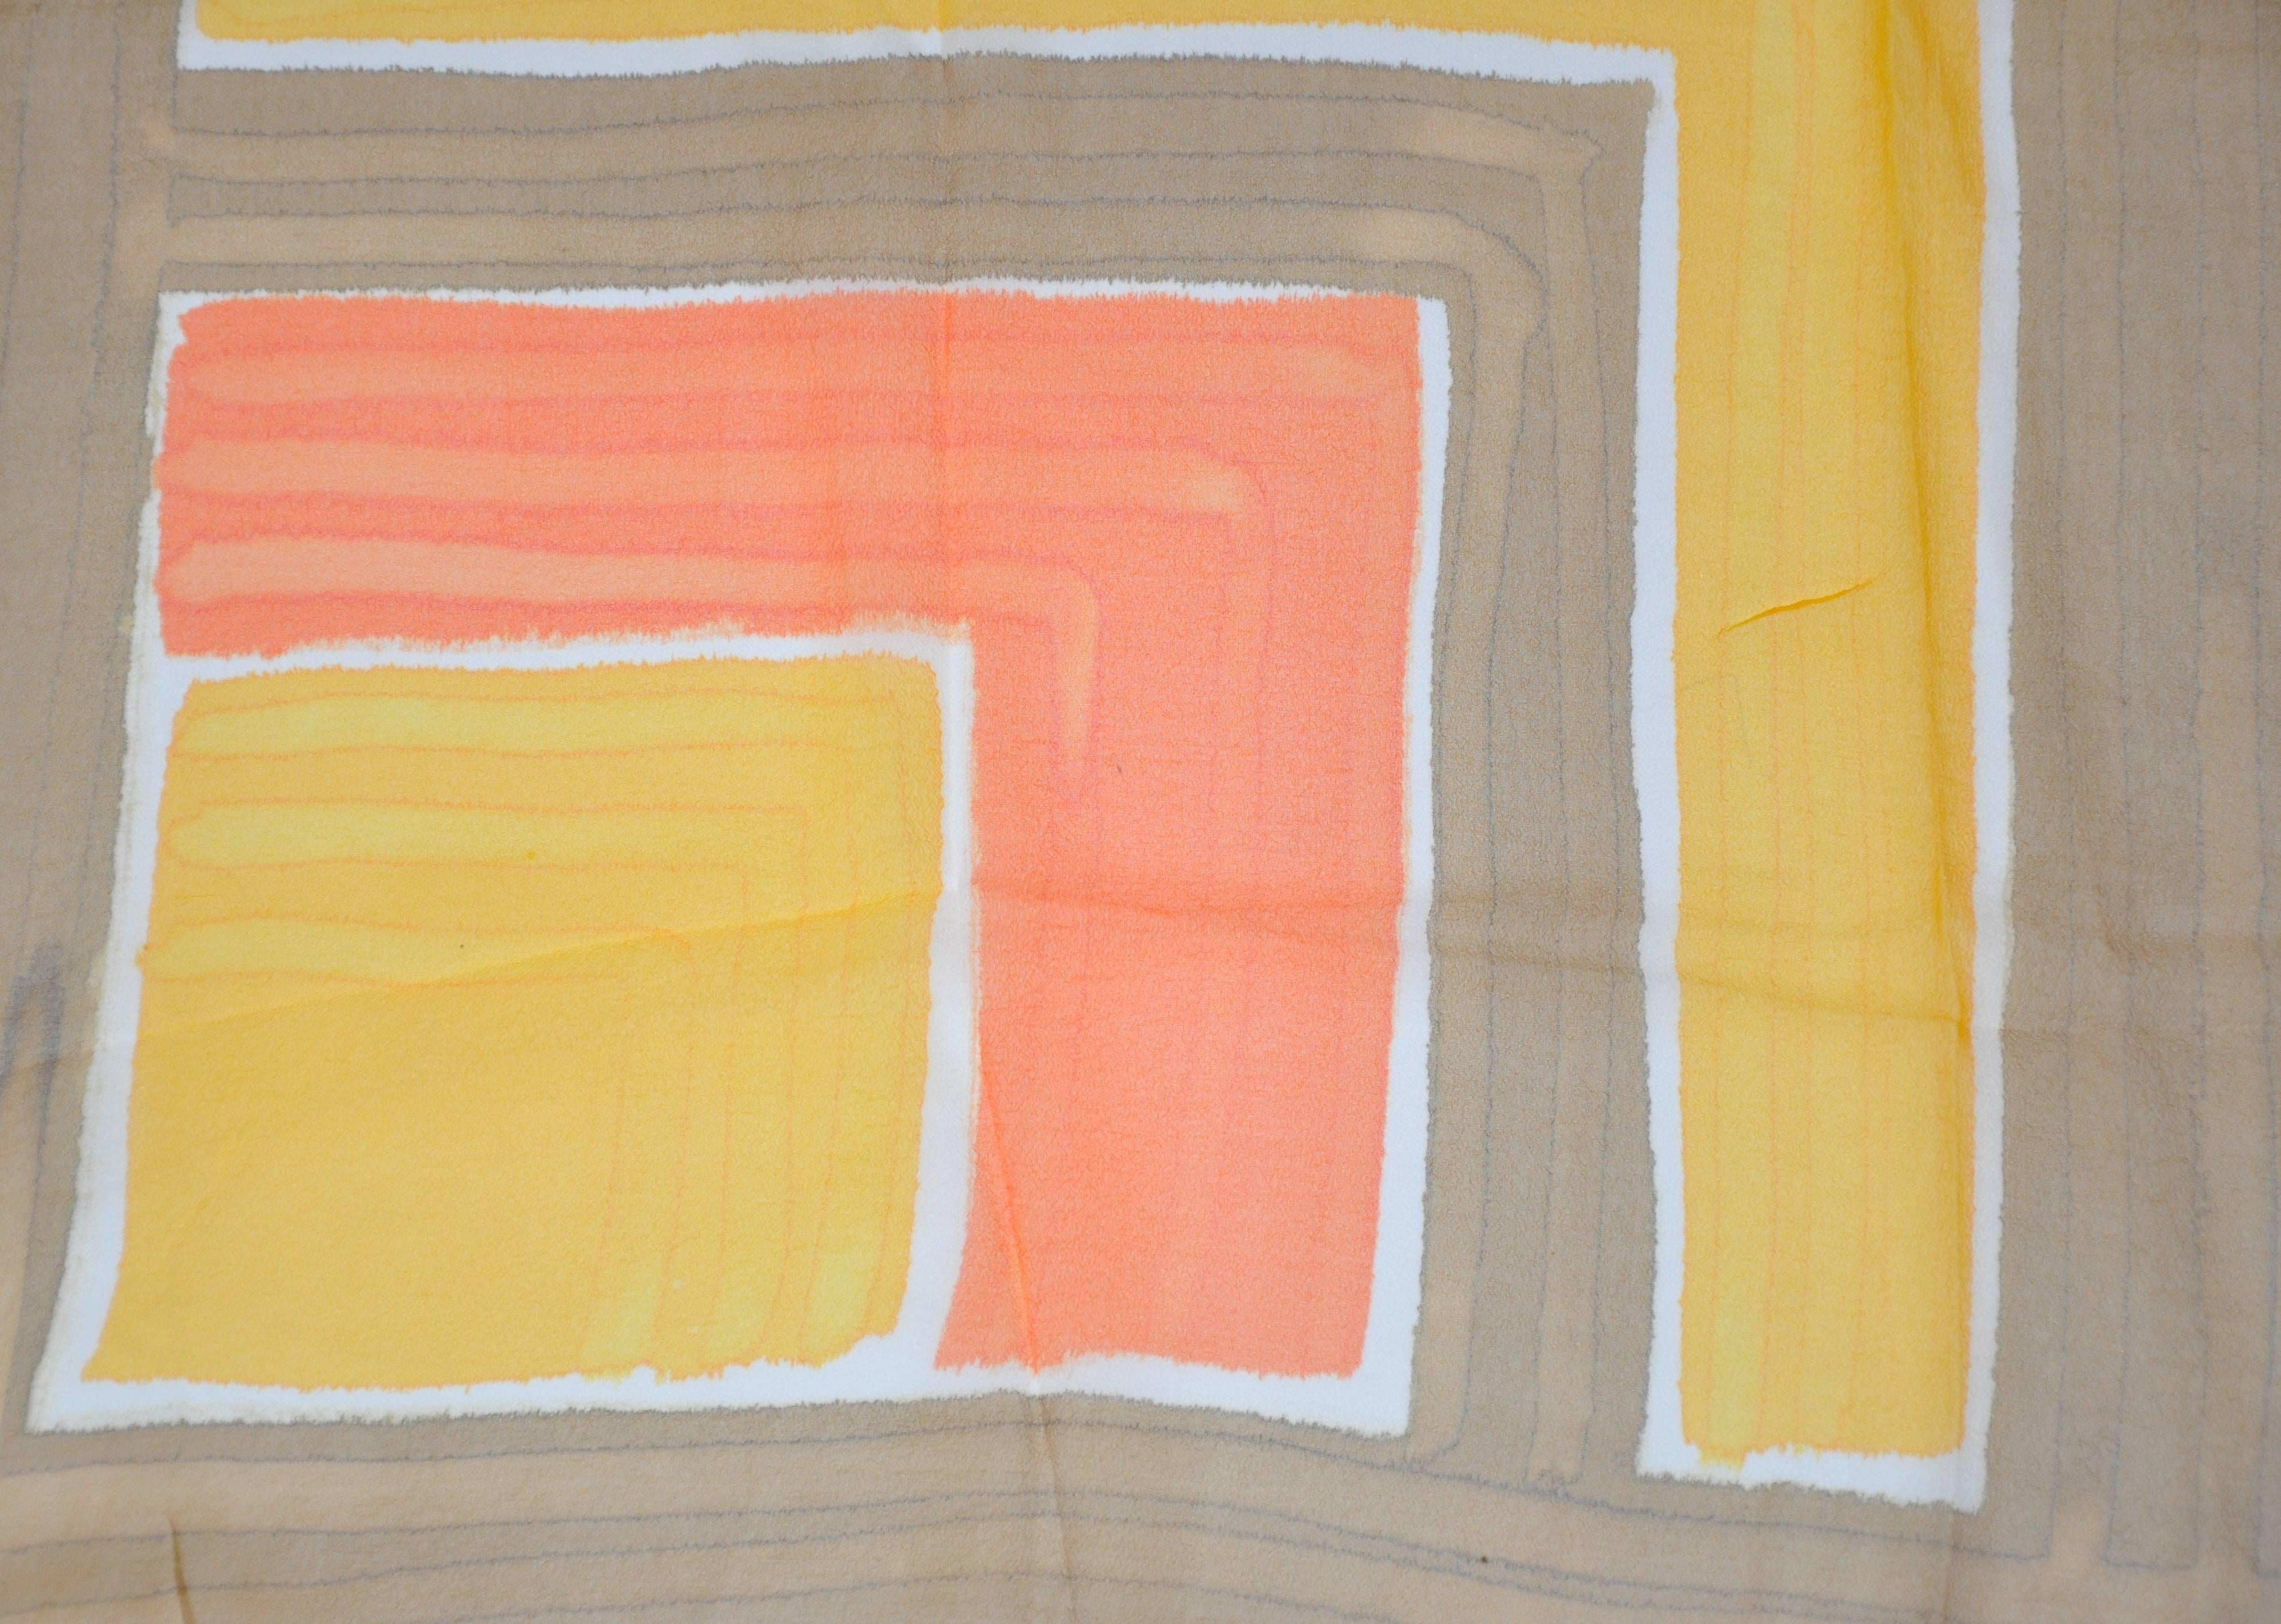 This wonderful sheer browns with tangerine & yellow color-block scarf measures 27" x 27". Made of 60% vinyl and 40% silk with hand-rolled edges. Made in Japan.